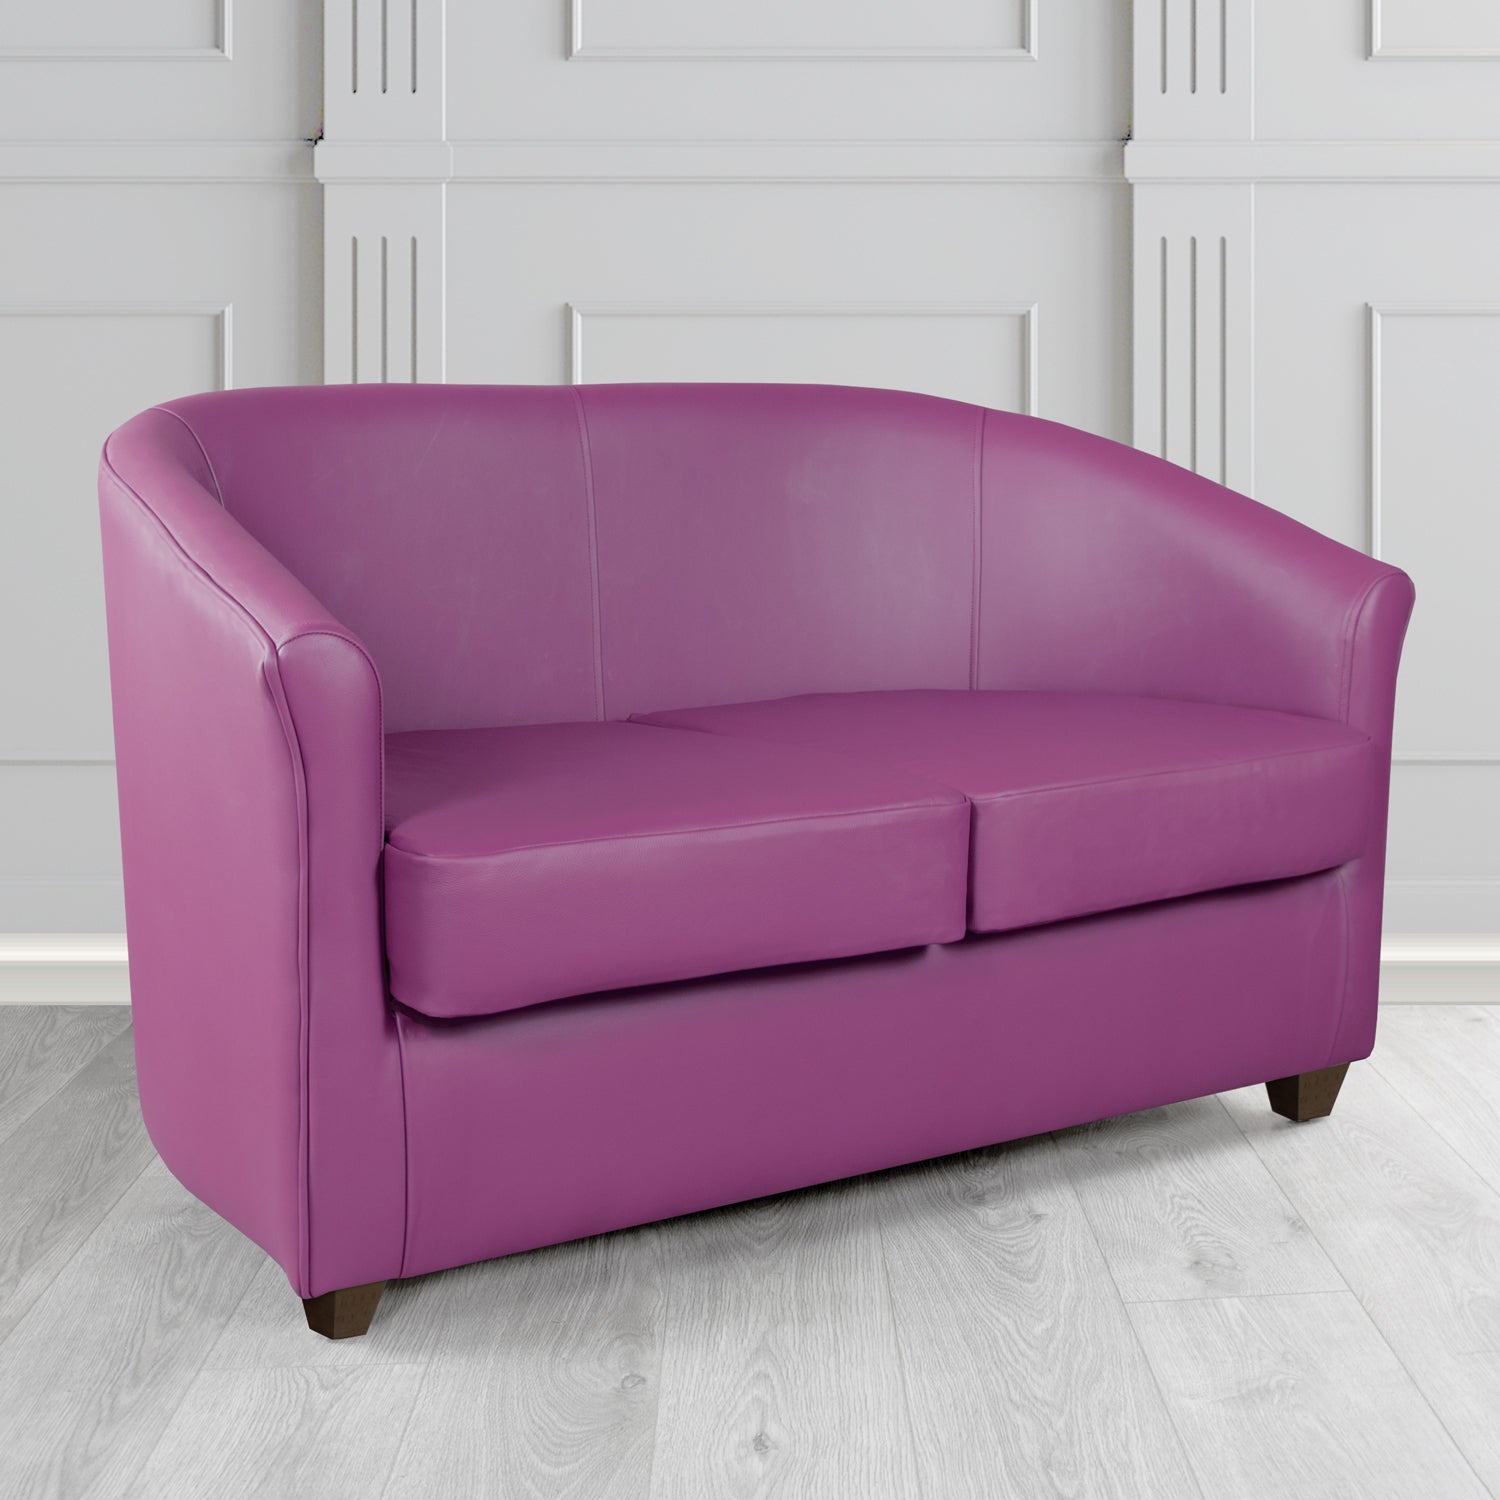 Cannes Shelly Wineberry Crib 5 Genuine Leather 2 Seater Tub Sofa - The Tub Chair Shop